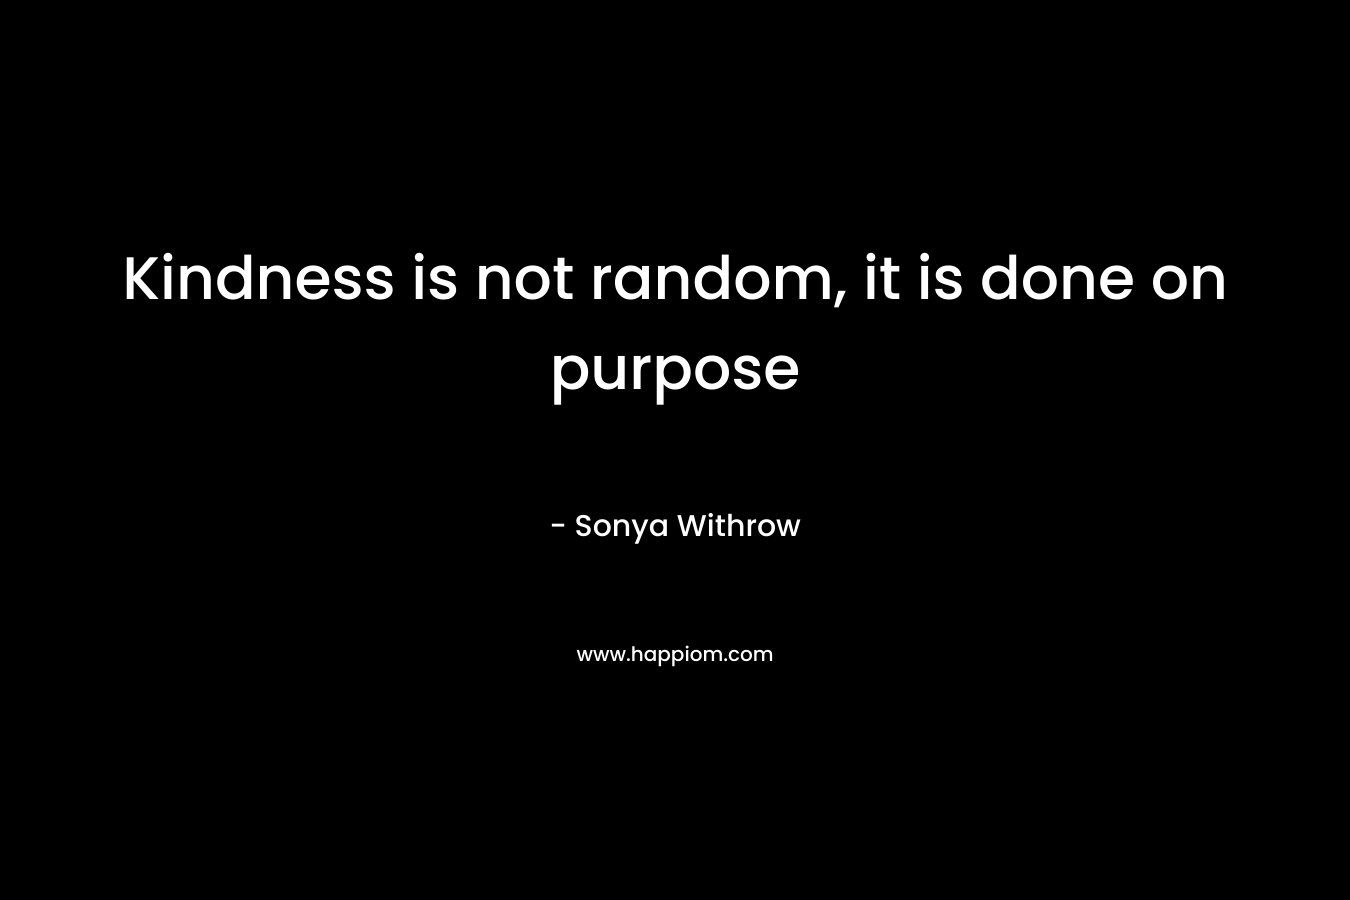 Kindness is not random, it is done on purpose